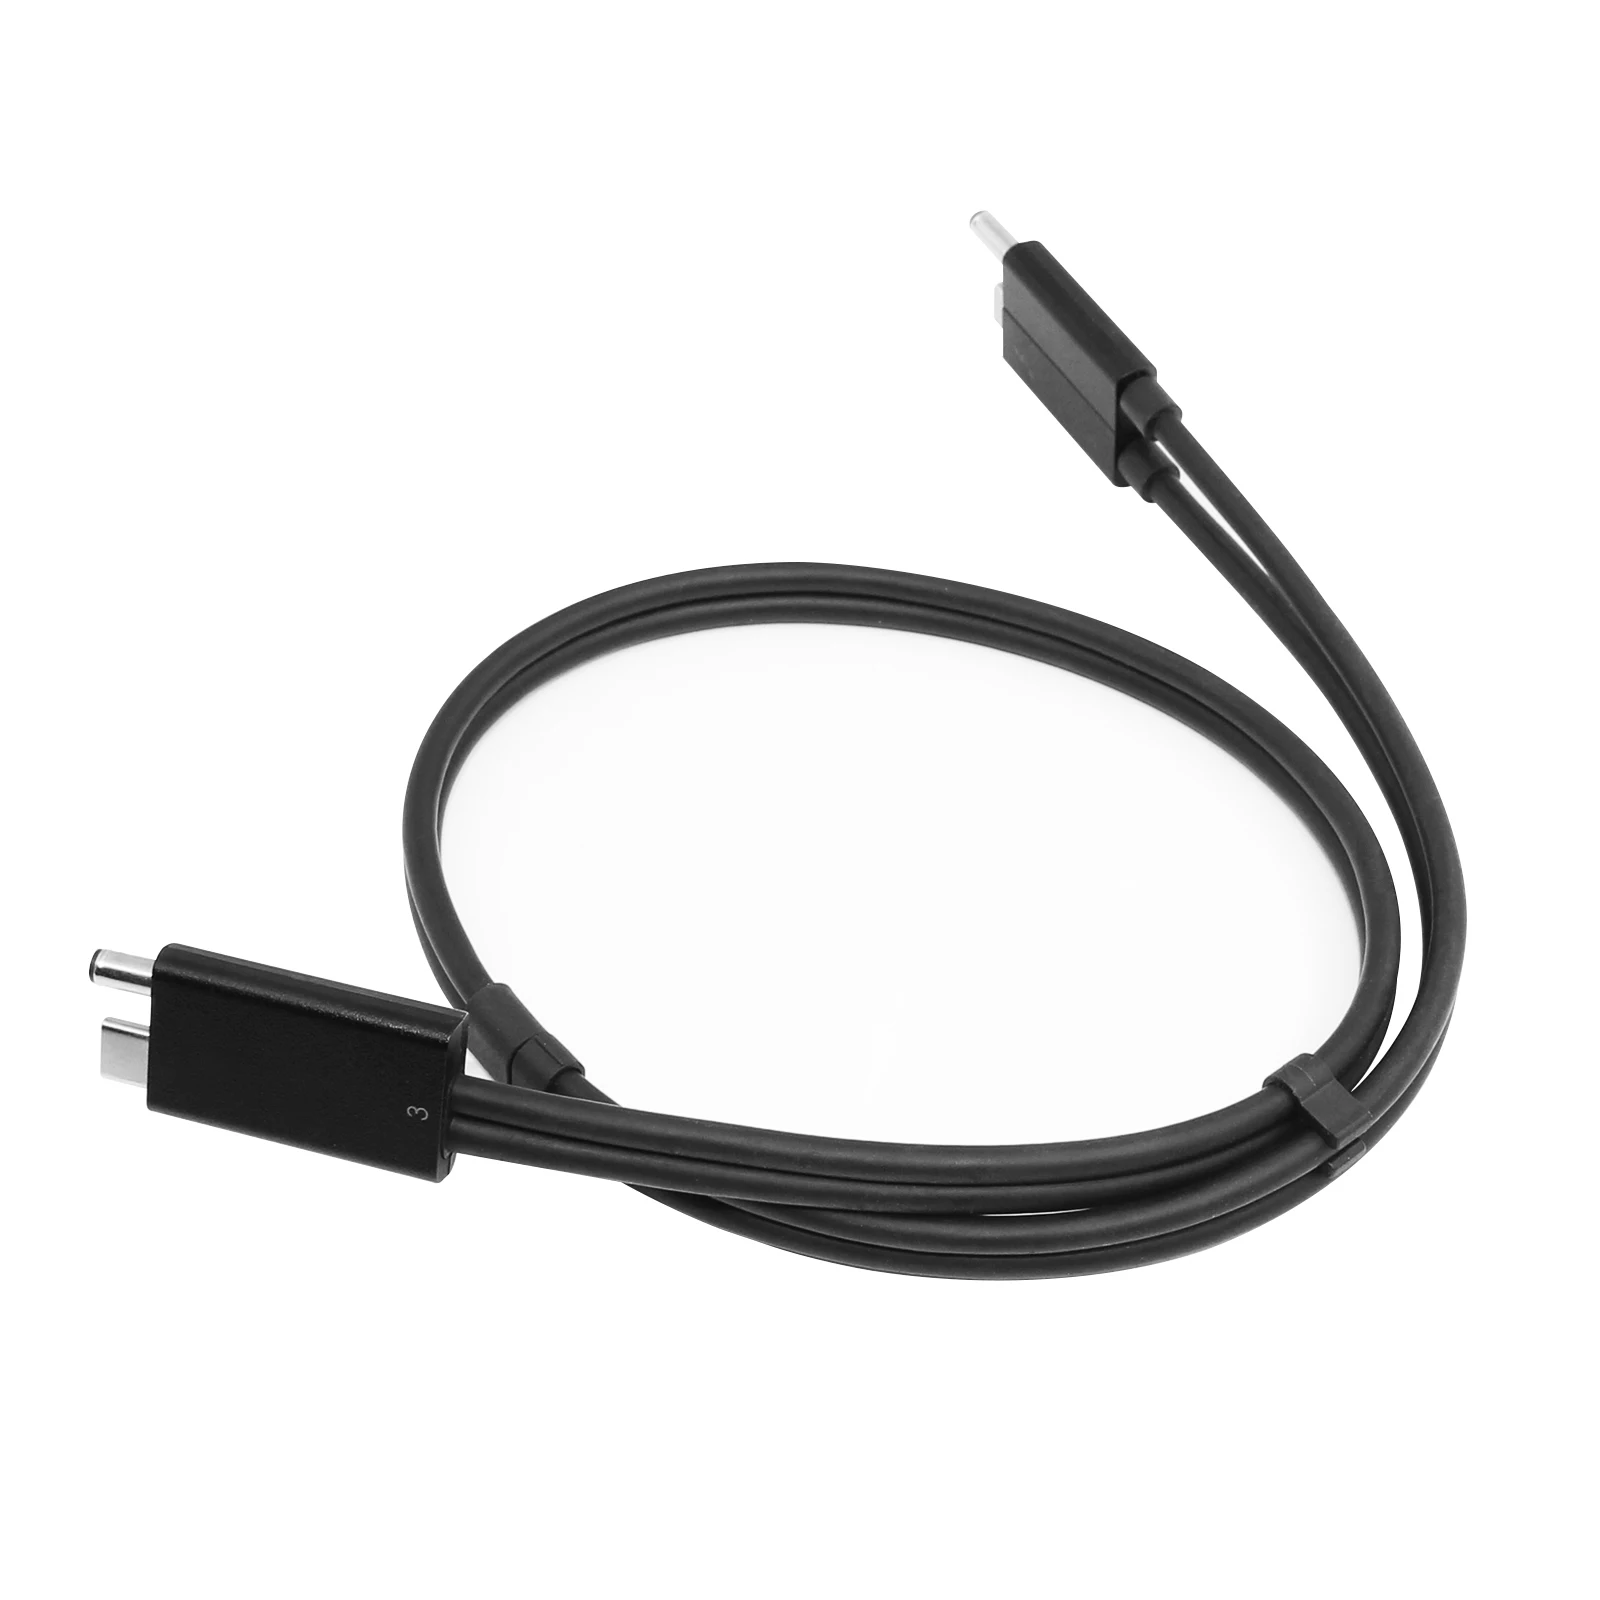 Skur Artifact lommeregner Hp Thunderbolt Dock G2 Combo Cable | Hp Thunderbolt 3 Dock Cable | Hp  Thunderbolt 3 G2 - Audio & Video Cables - Aliexpress